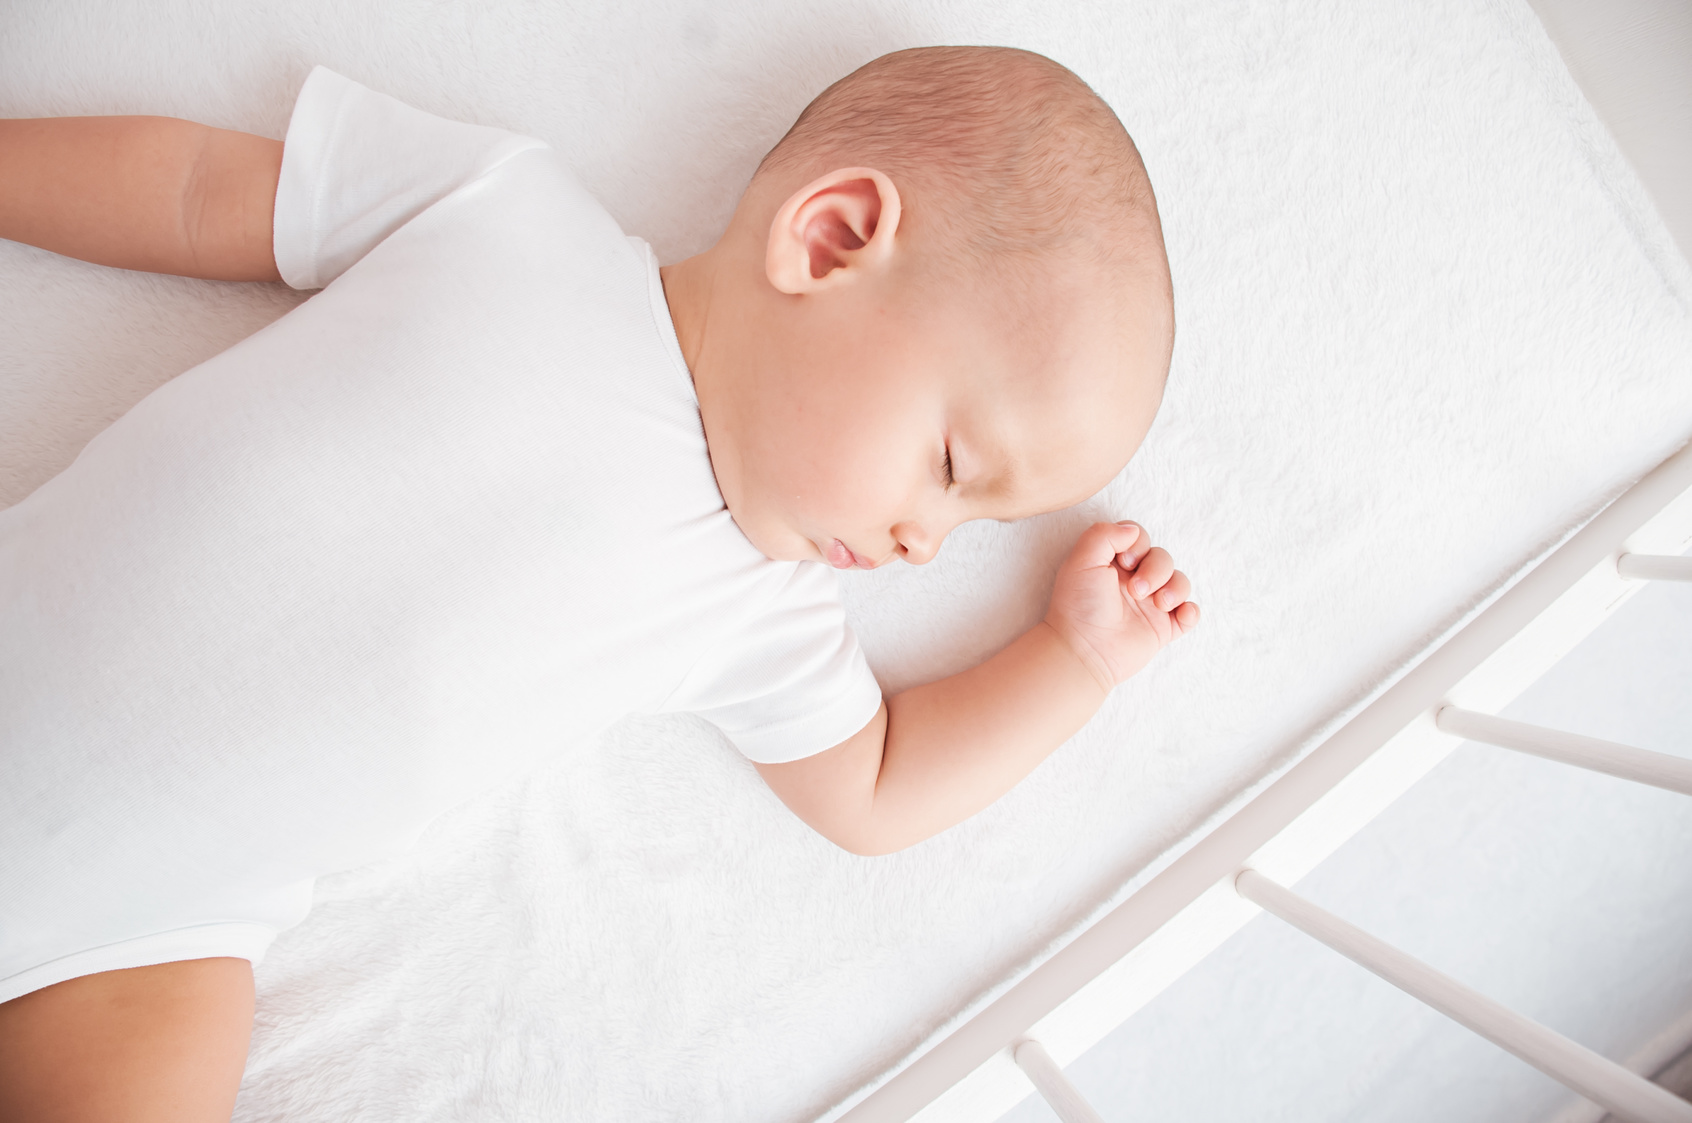 know - baby sleping on back in a white onesie in a white crib on a white sheet